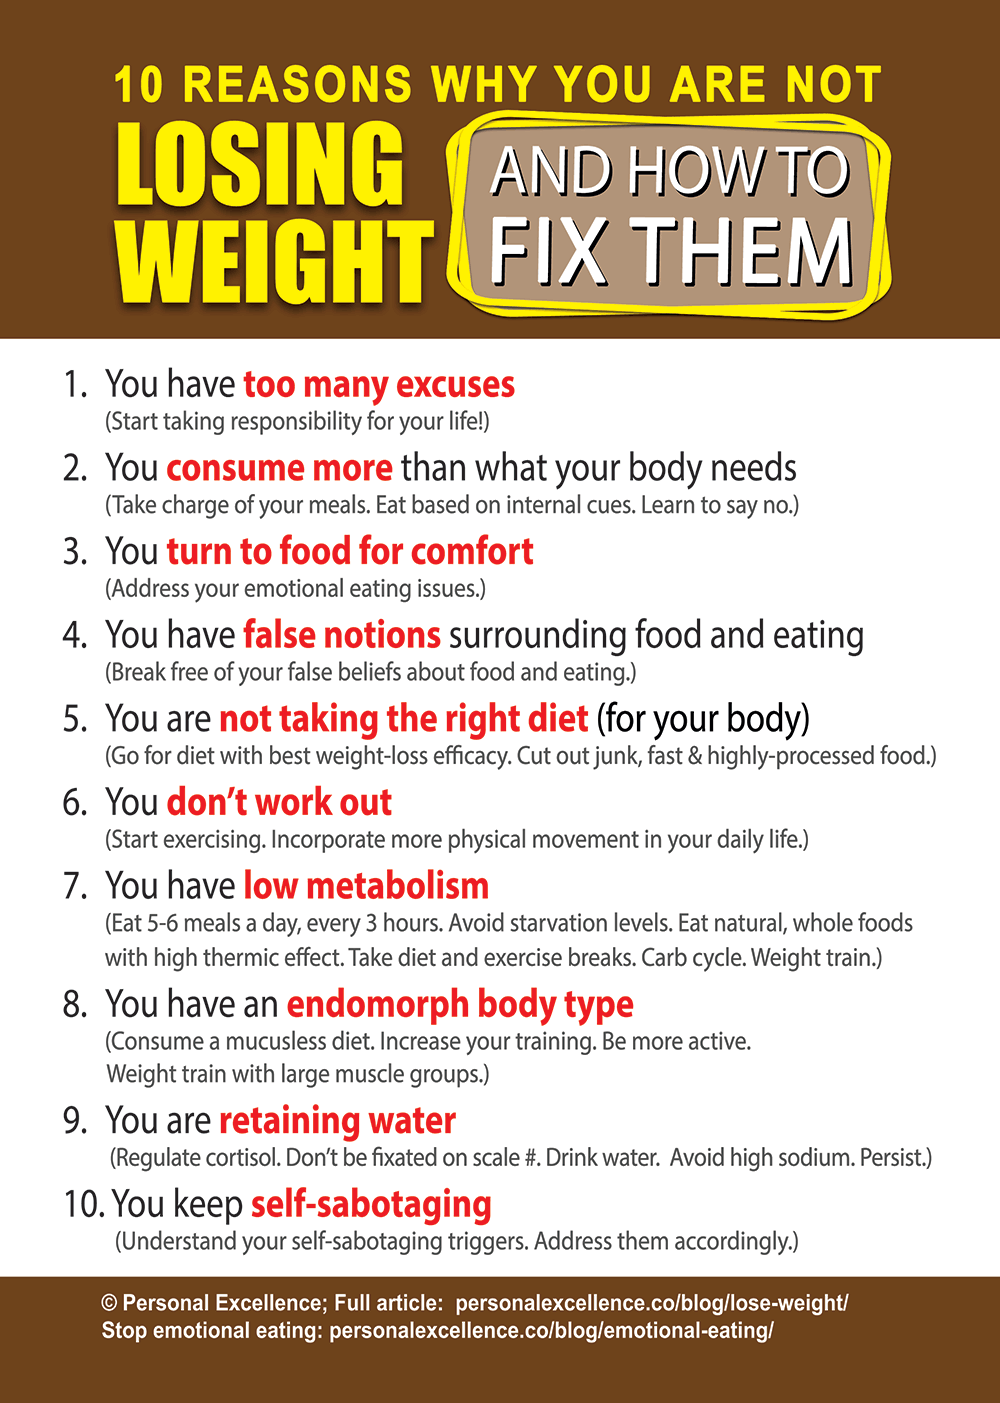 reasons to lose weight